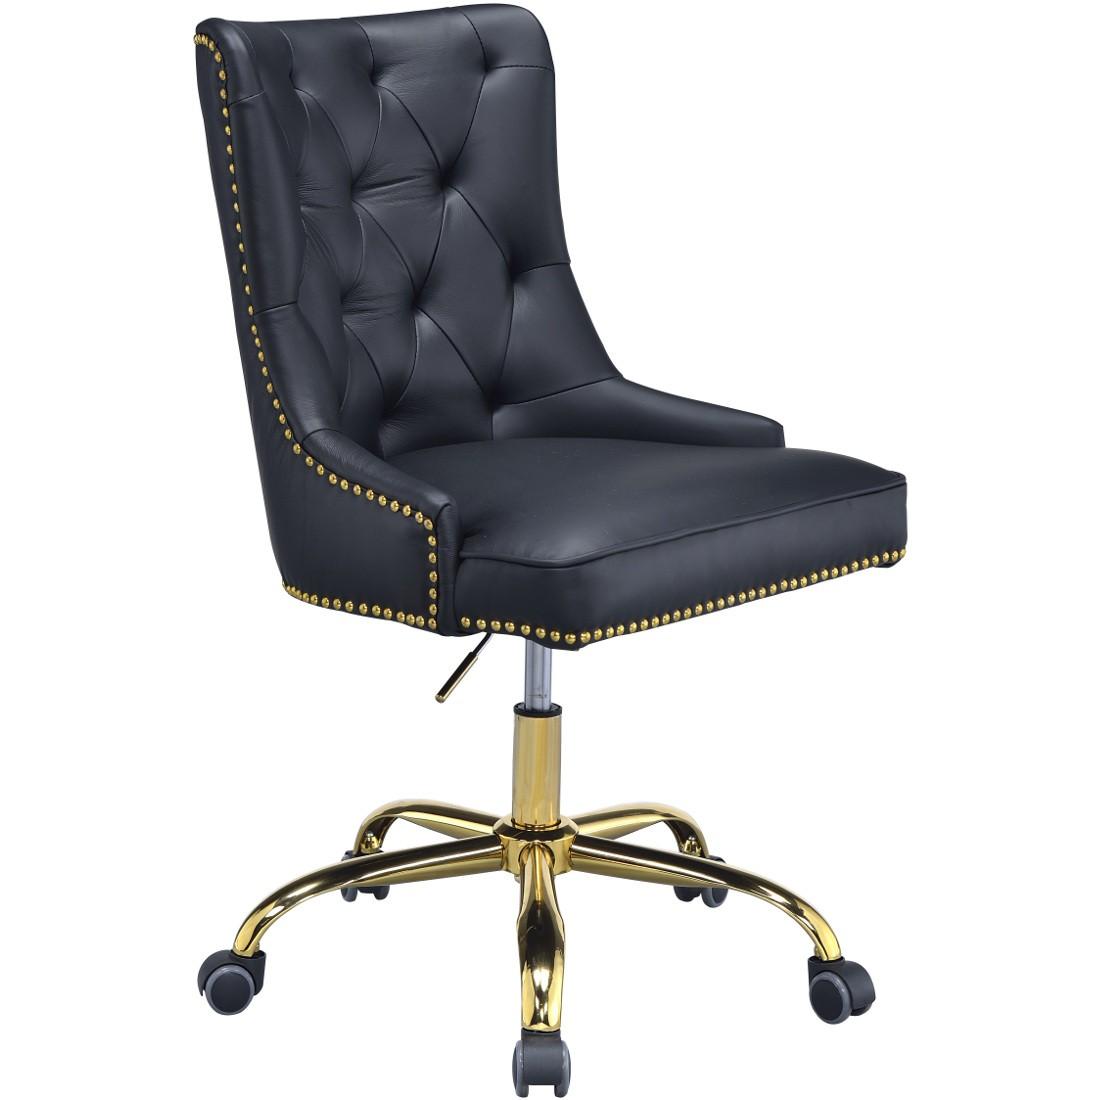 

    
Home Office Chair Black PU & Gold Purlie 92518 Acme Transitional Contemporary
